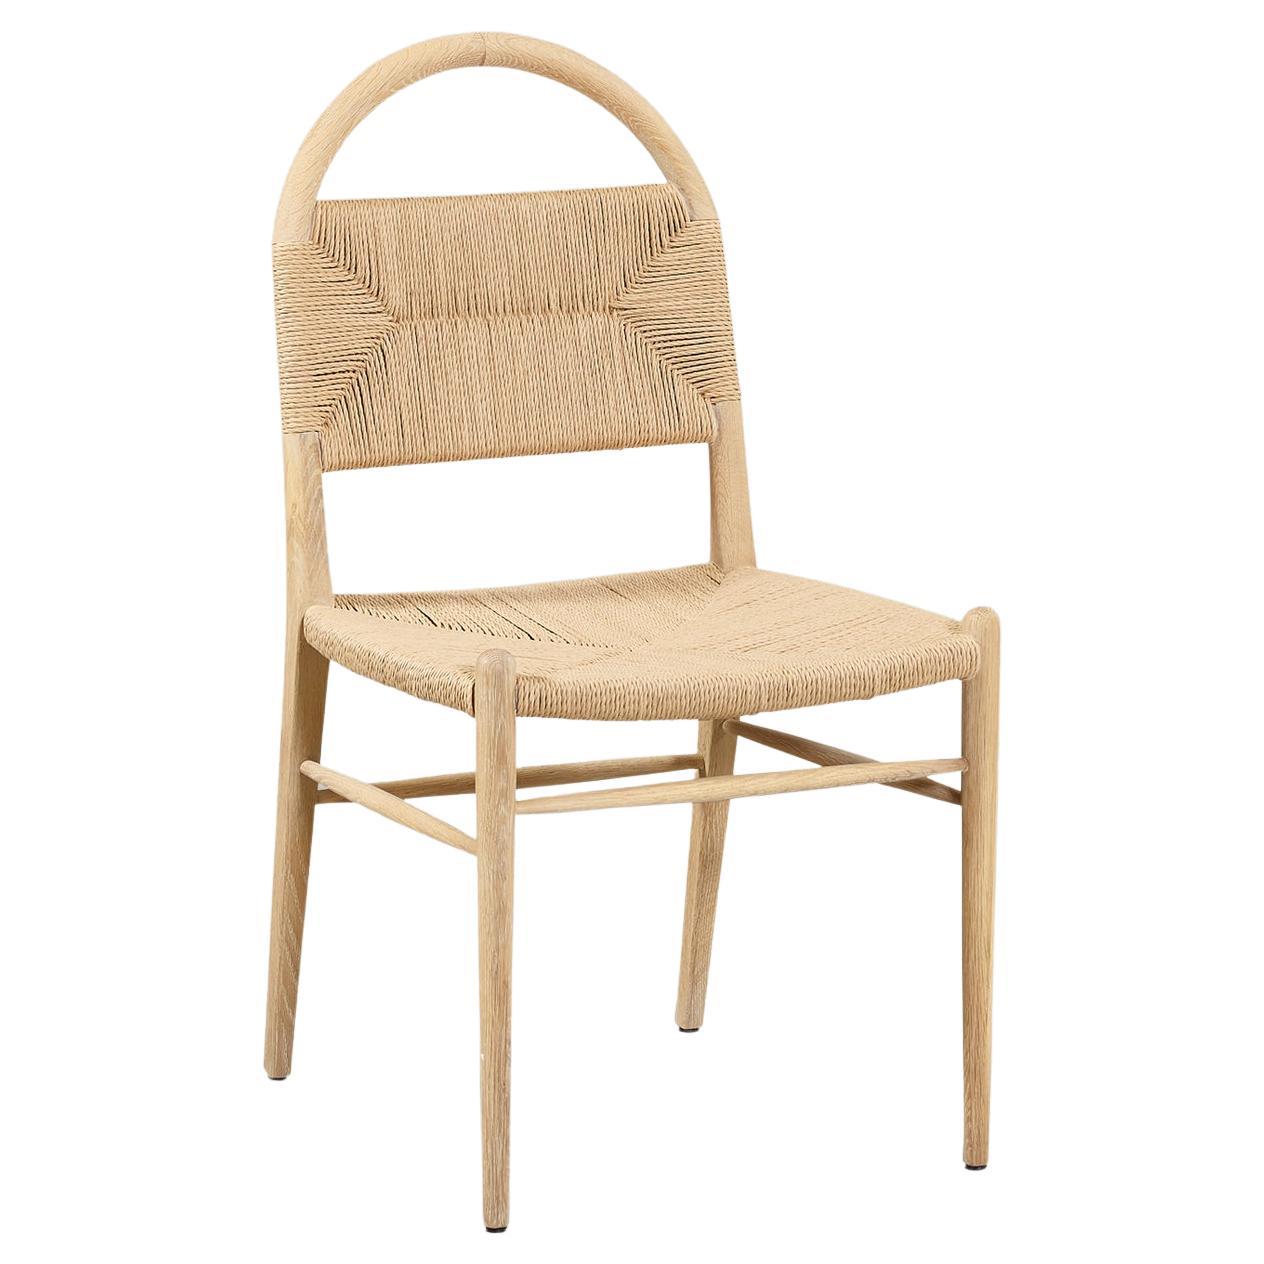 "Pernelle" Rush Weave and French Oak Dining Side Chair by Christiane Lemieux